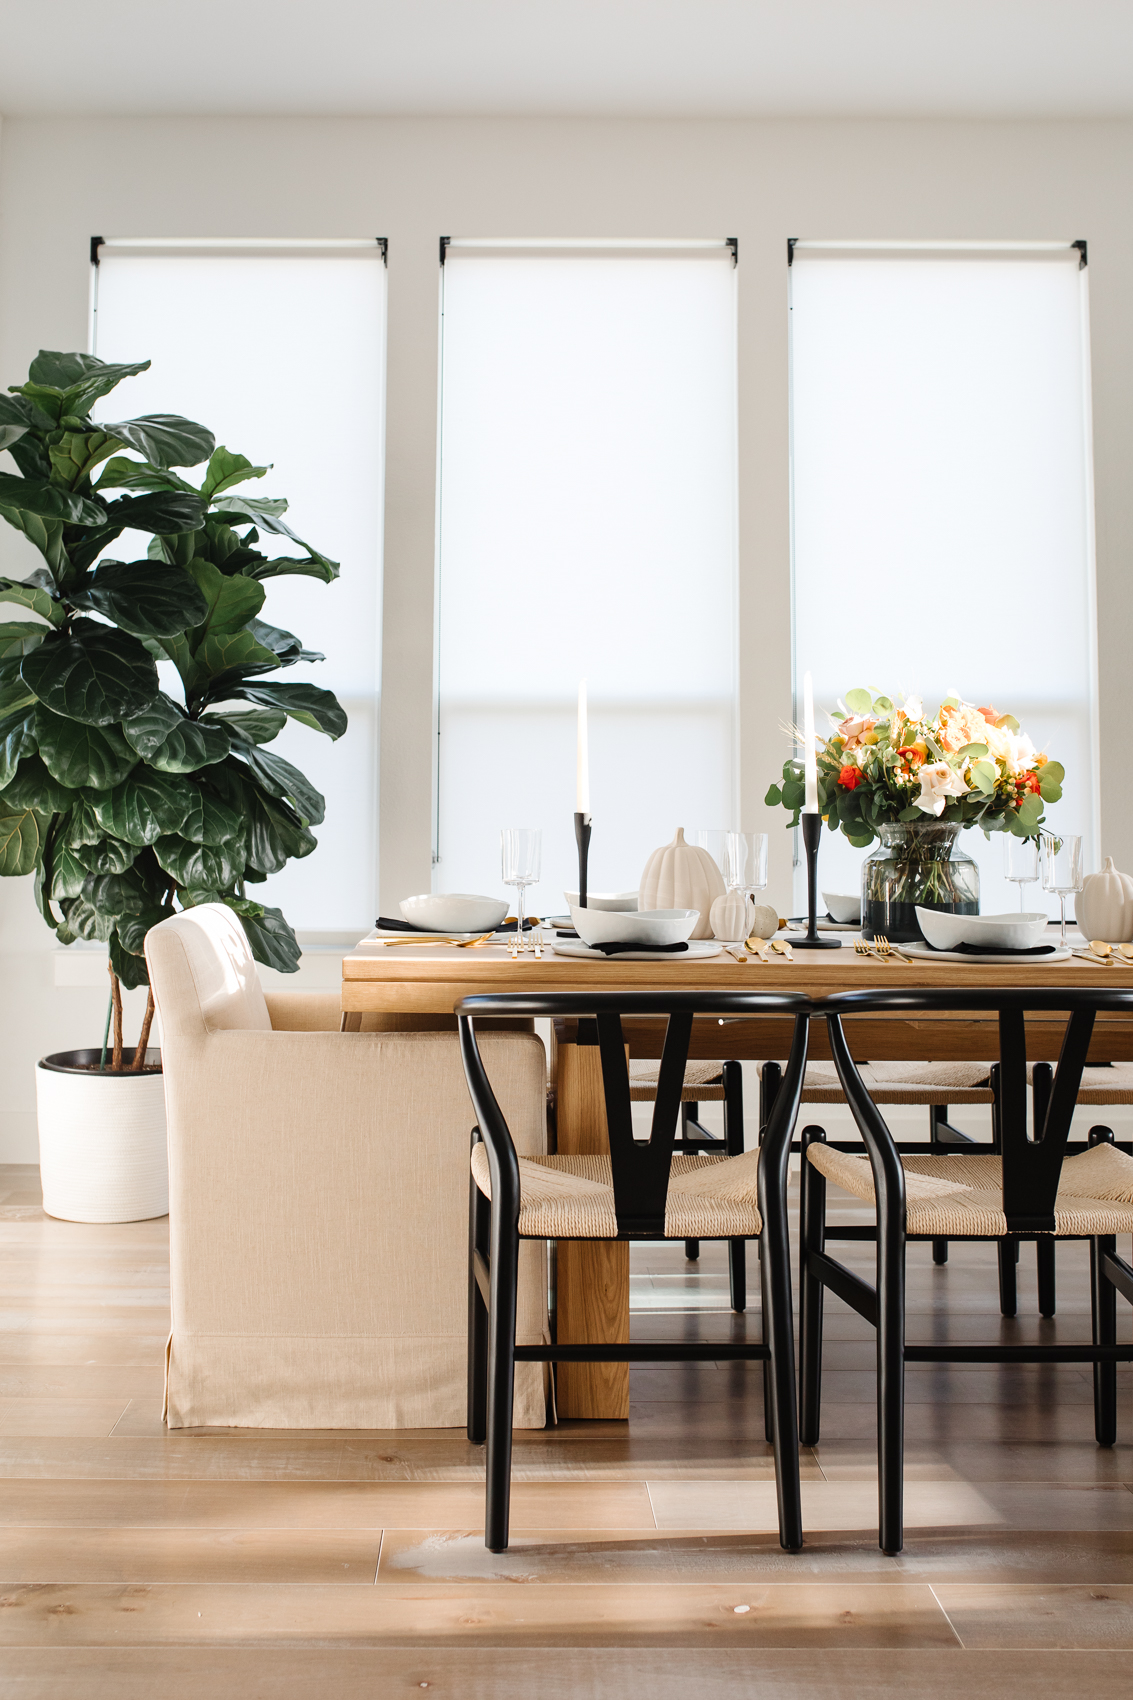 Blogger Hoang-Kim Cung shares Thanksgiving table decor inspiration in her transitional style home in Dallas, Texas